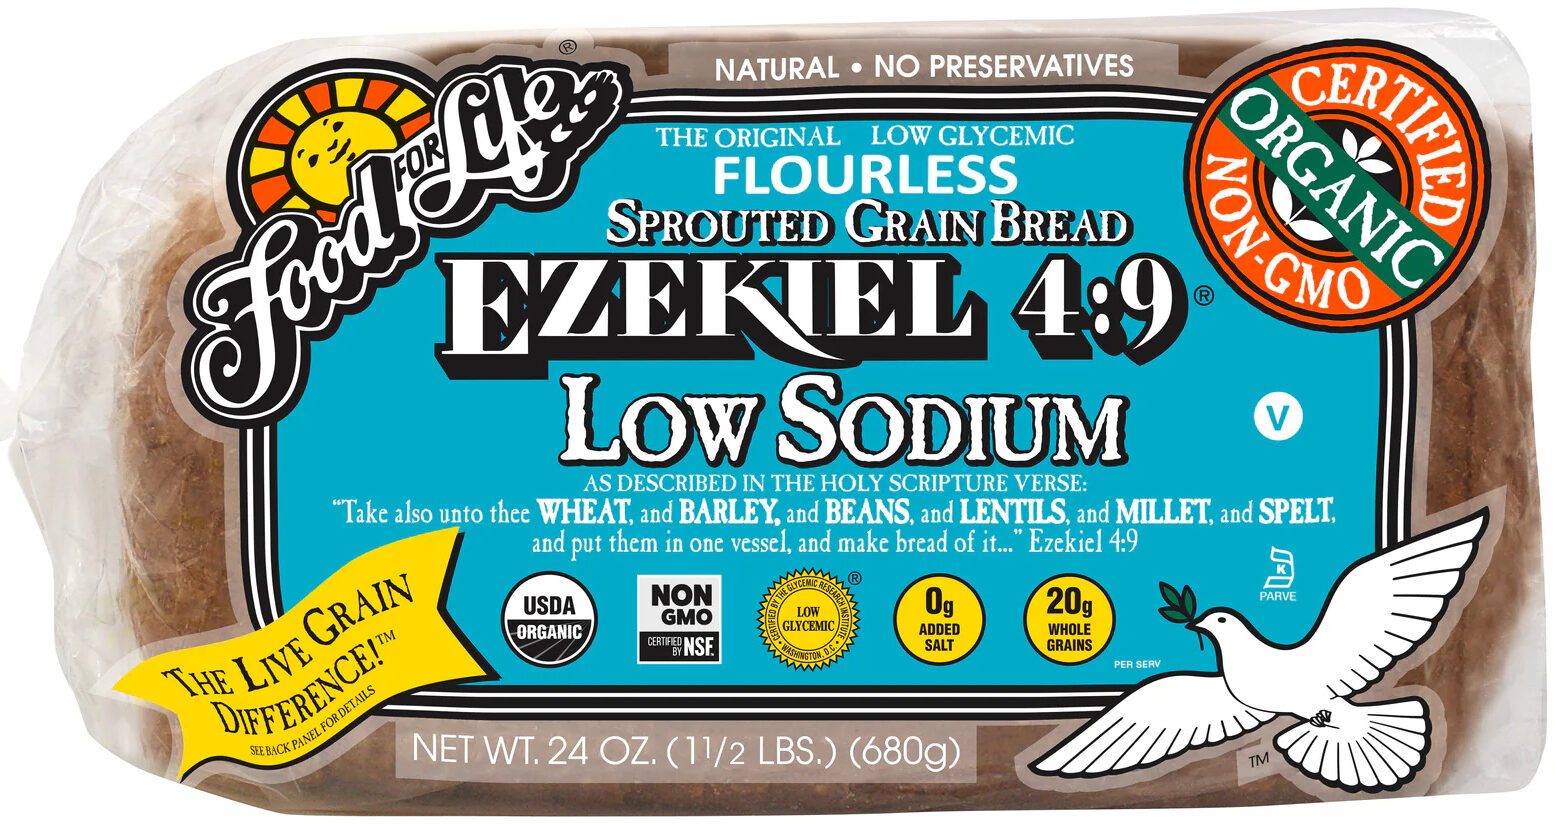 Ezekiel 4:9 Low Sodium Sprouted Whole Grain Bread - Product